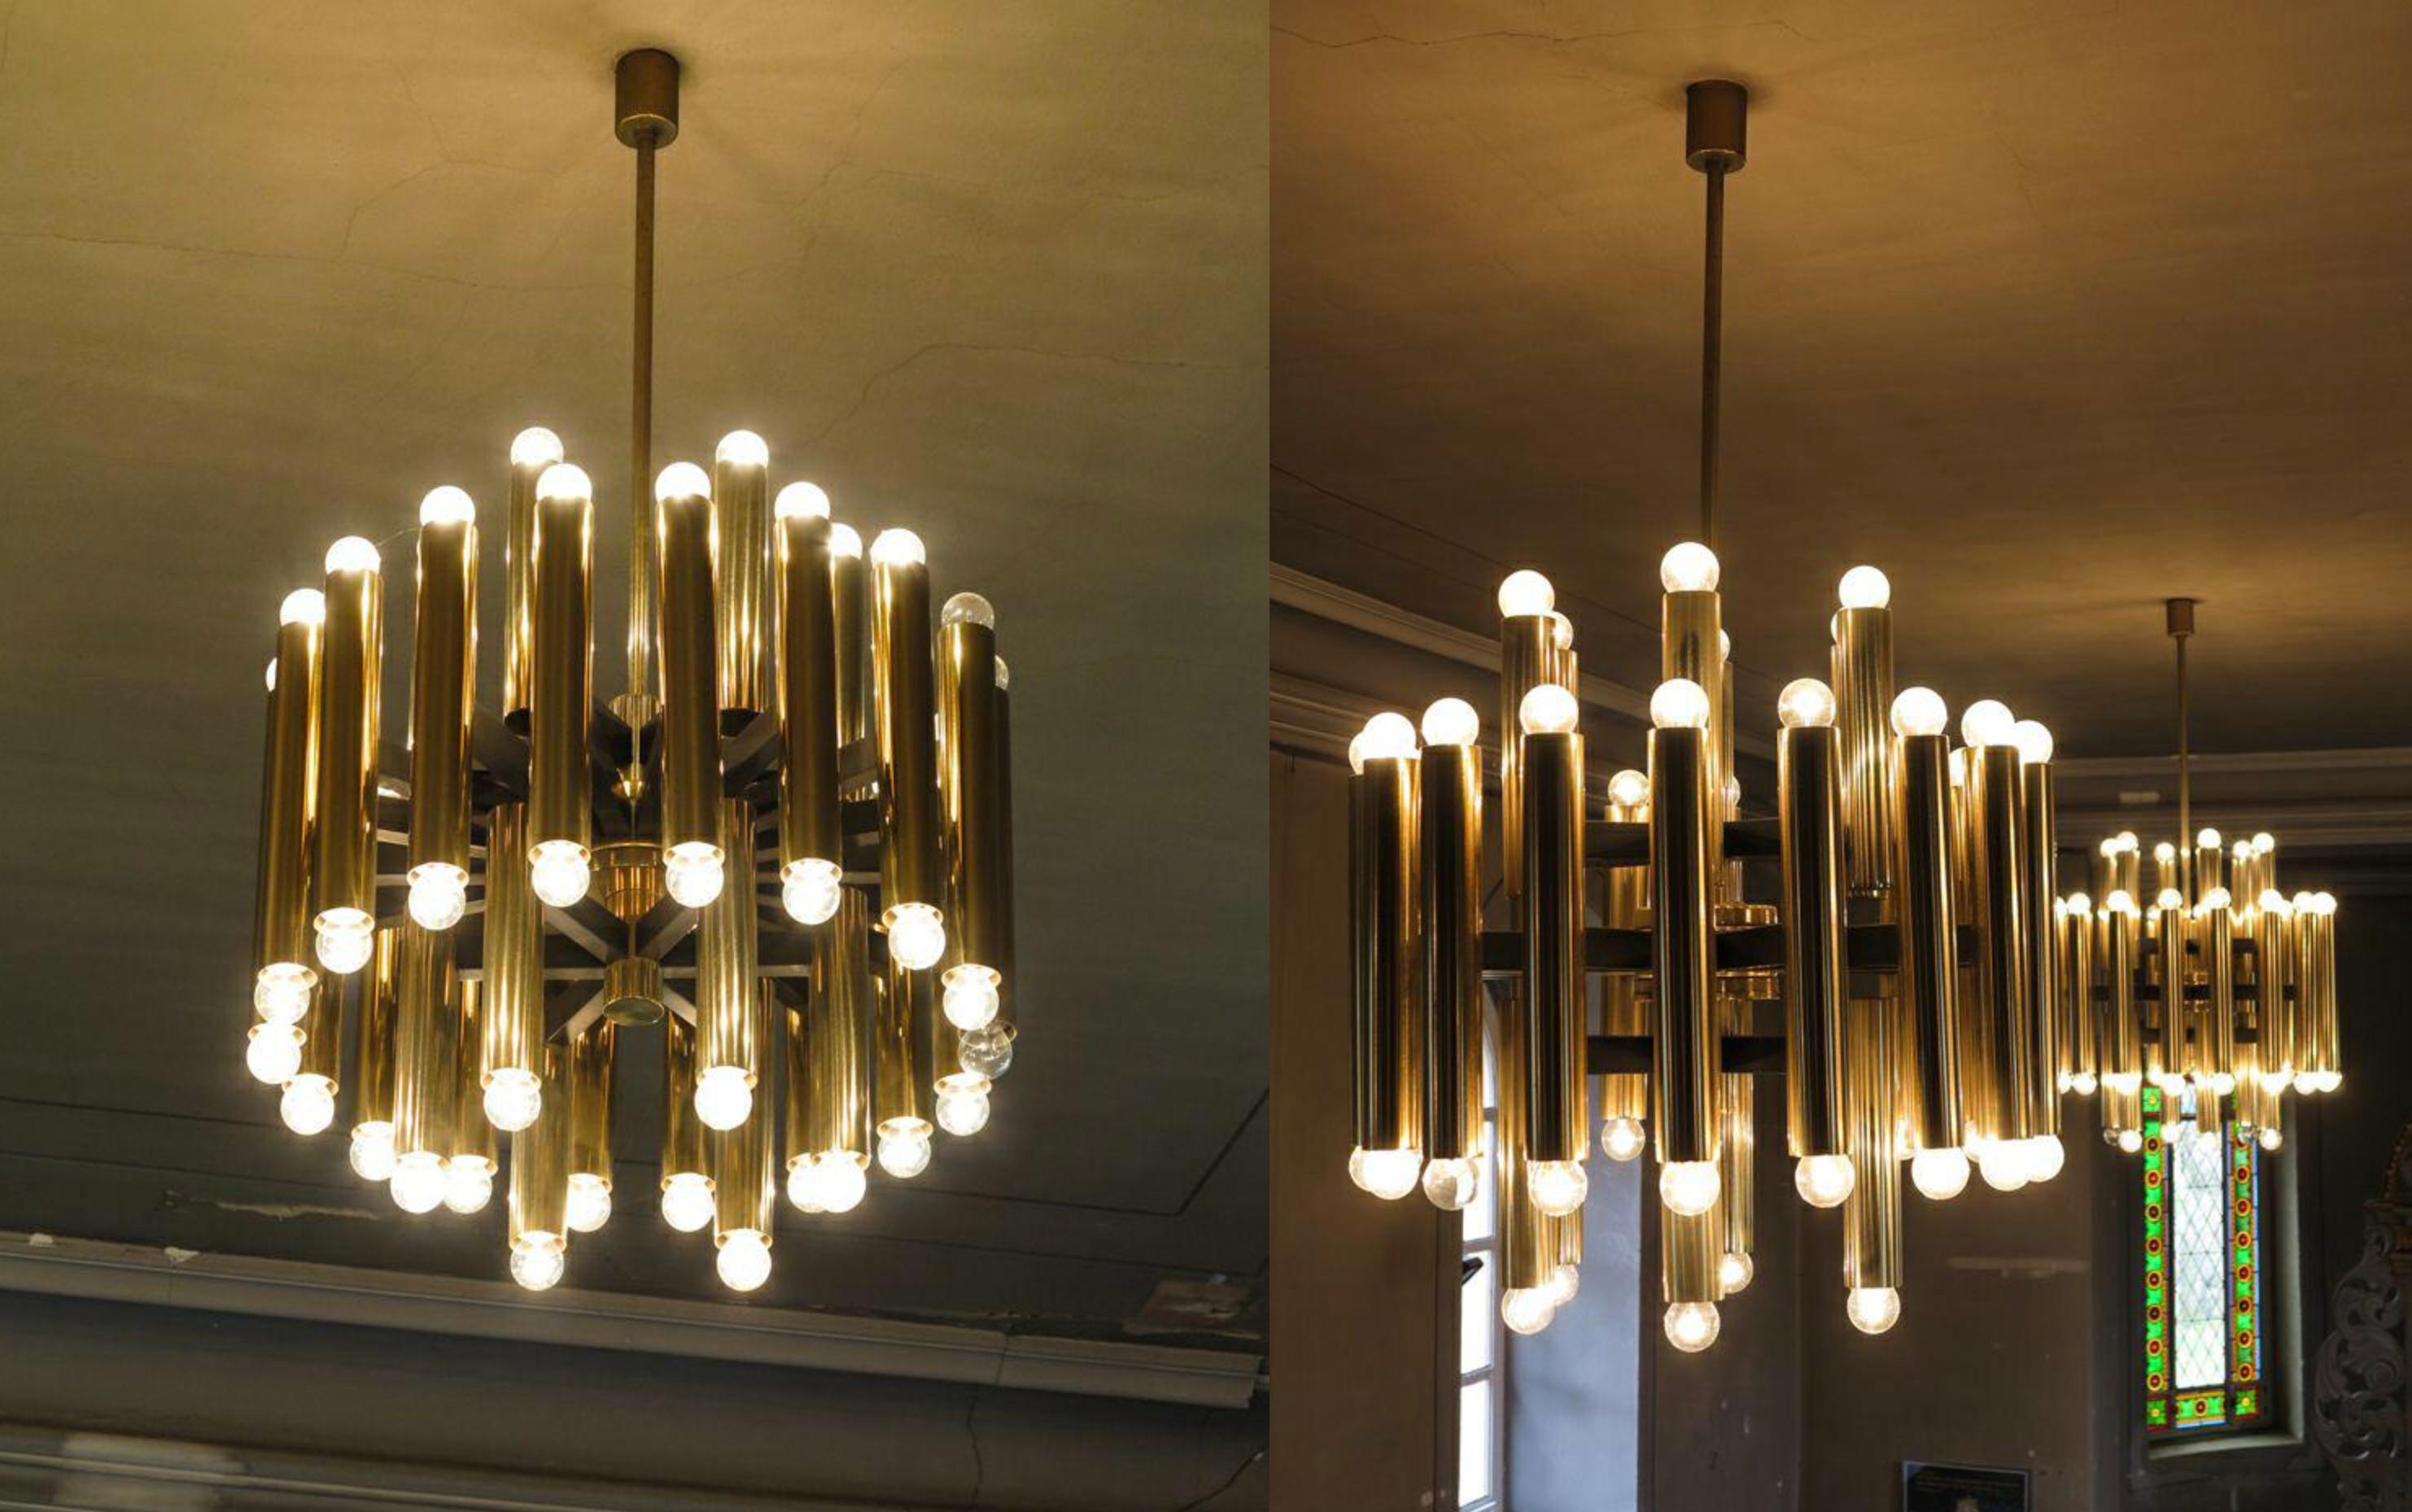 20th Century Large Midcentury Modernist Steel Chandelier with 48-Light Bulbs, Berlin, 1960s For Sale